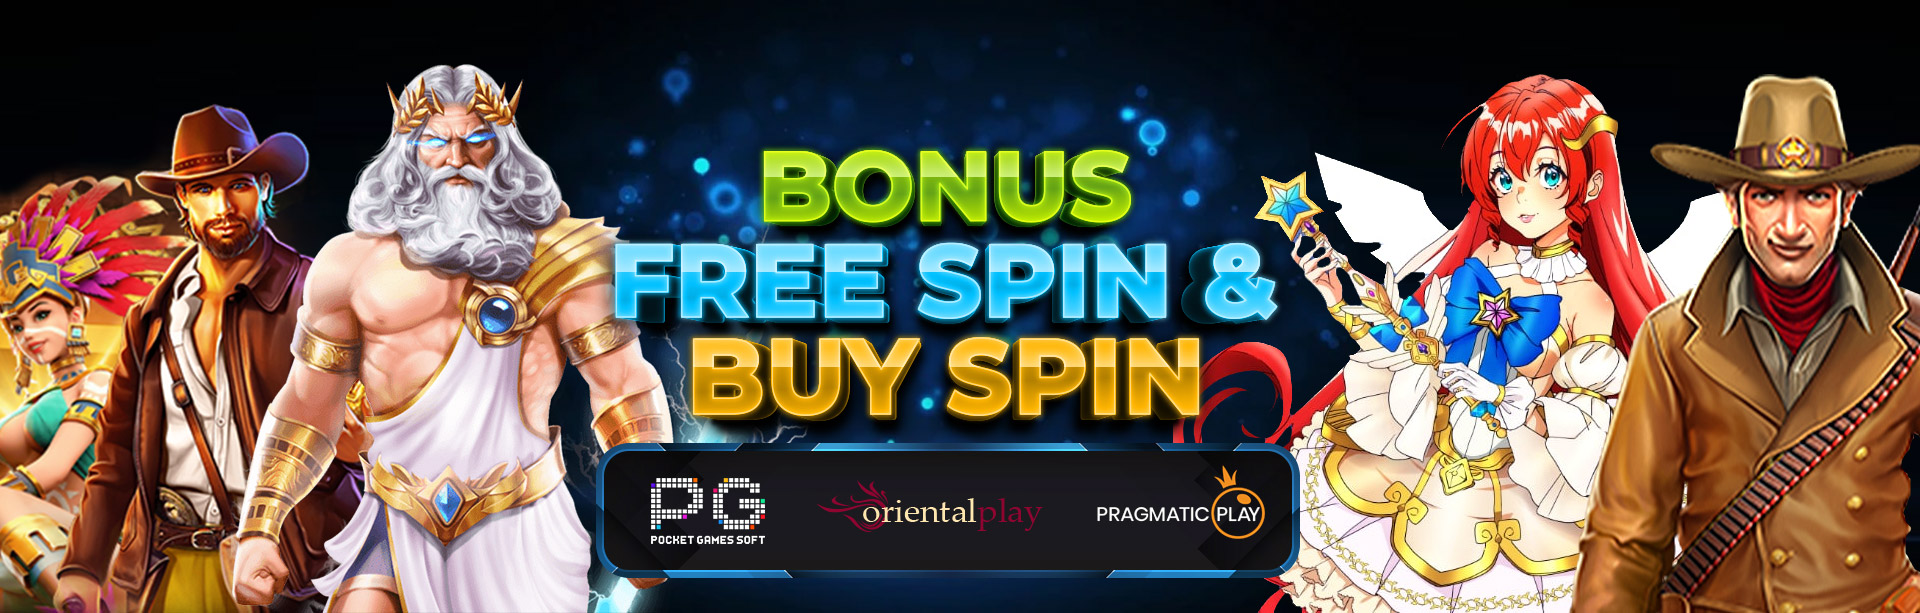 Event Buy Free Spin 20%  Free Spin Murni 25%